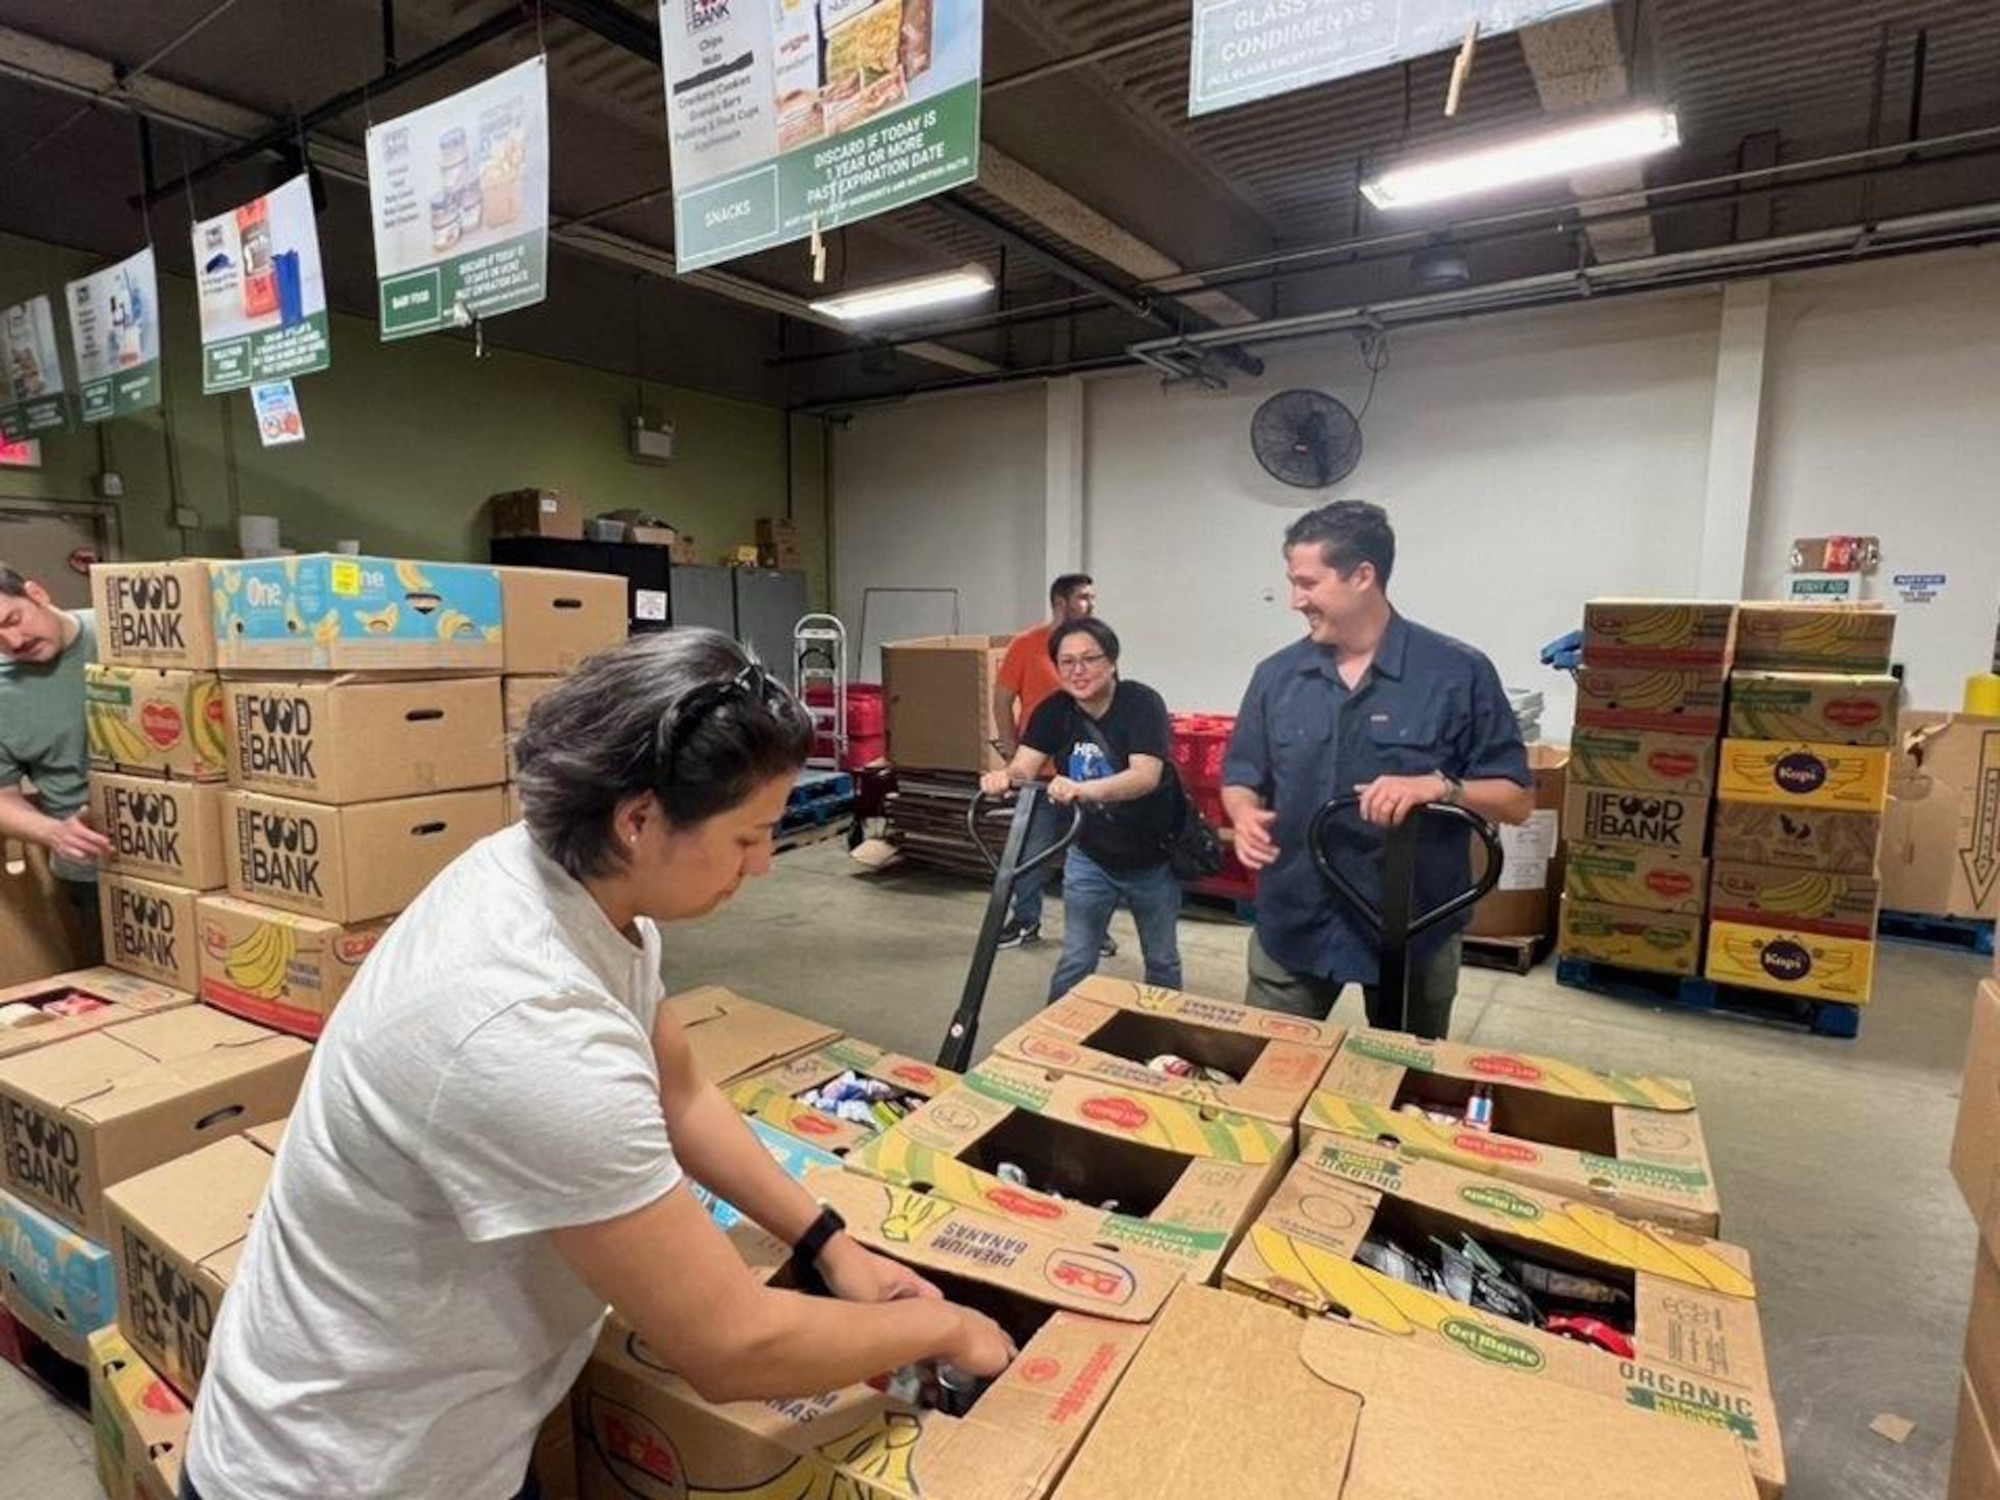 Student airmen and host members of the symposium prepare and package products to offer relief to food-insecure families and unsheltered persons at the San Antonio Food Bank on March 30, 2023. (Courtesy photo)